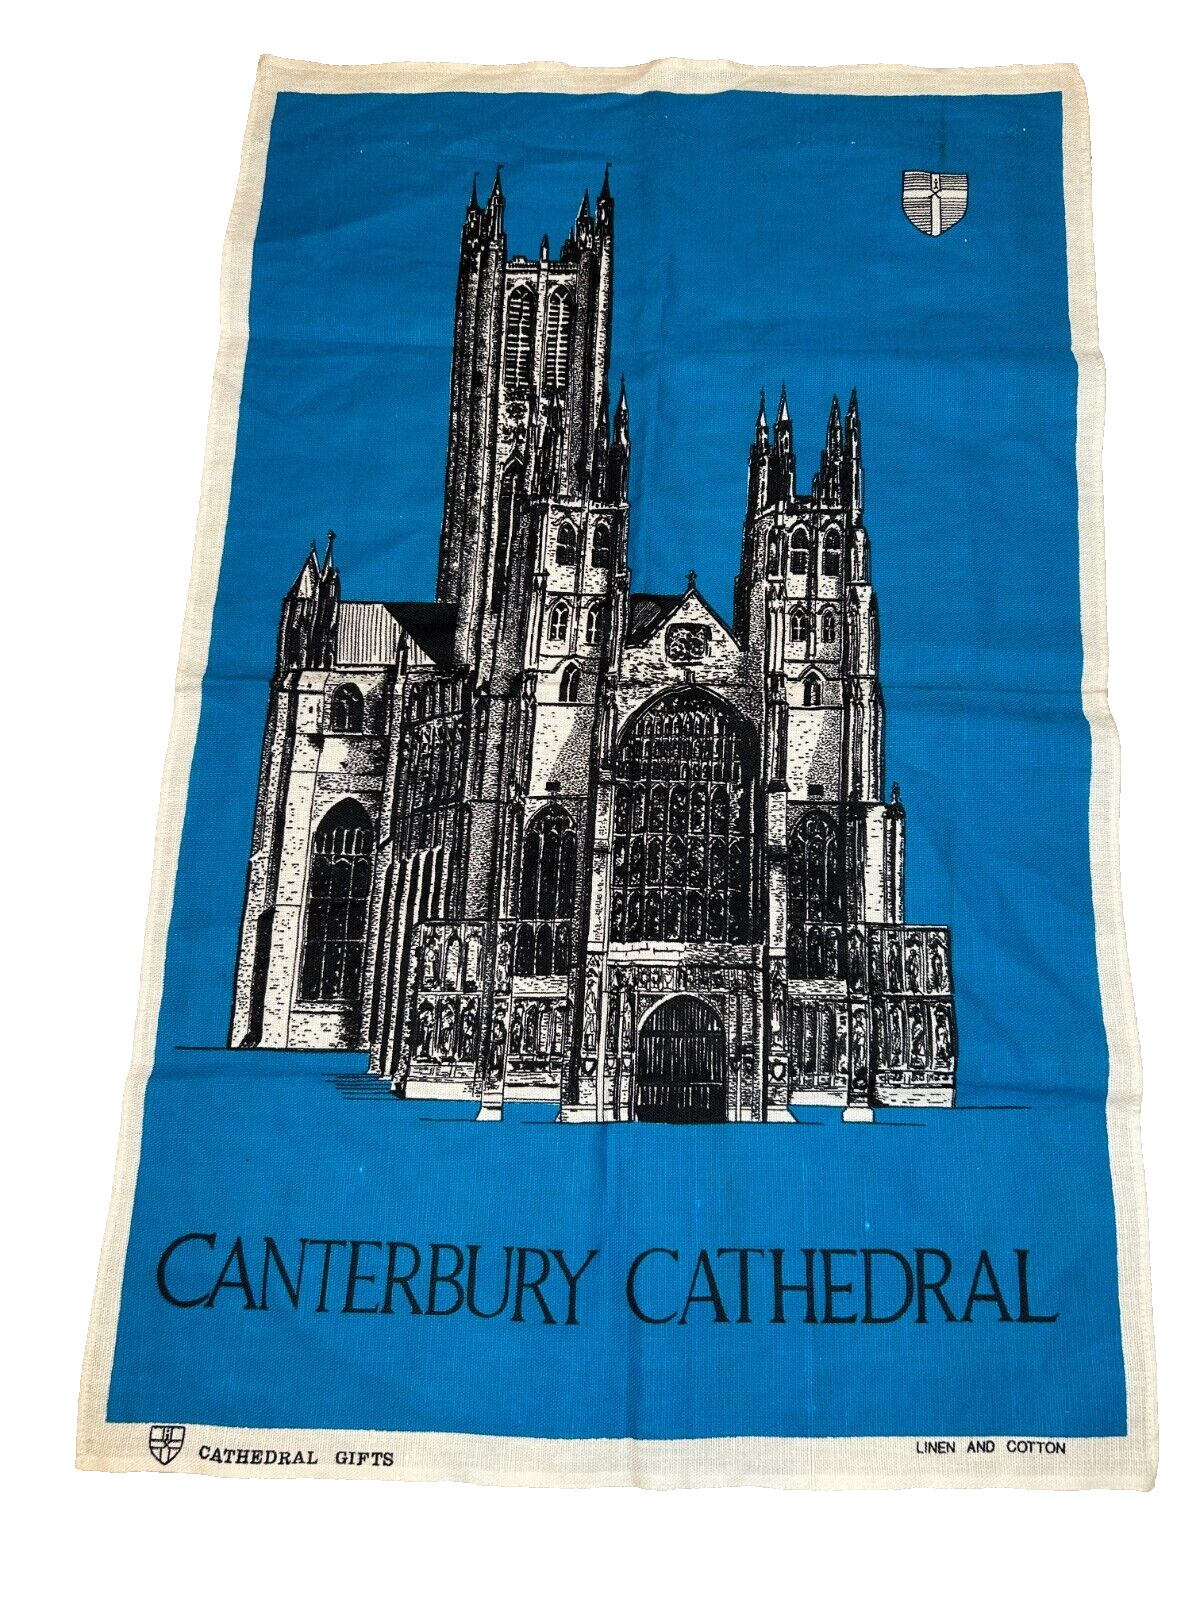 Vintage Canterbury Cathedral Tea Towel, Cathedral Gifts, Linen and Cotton Blue